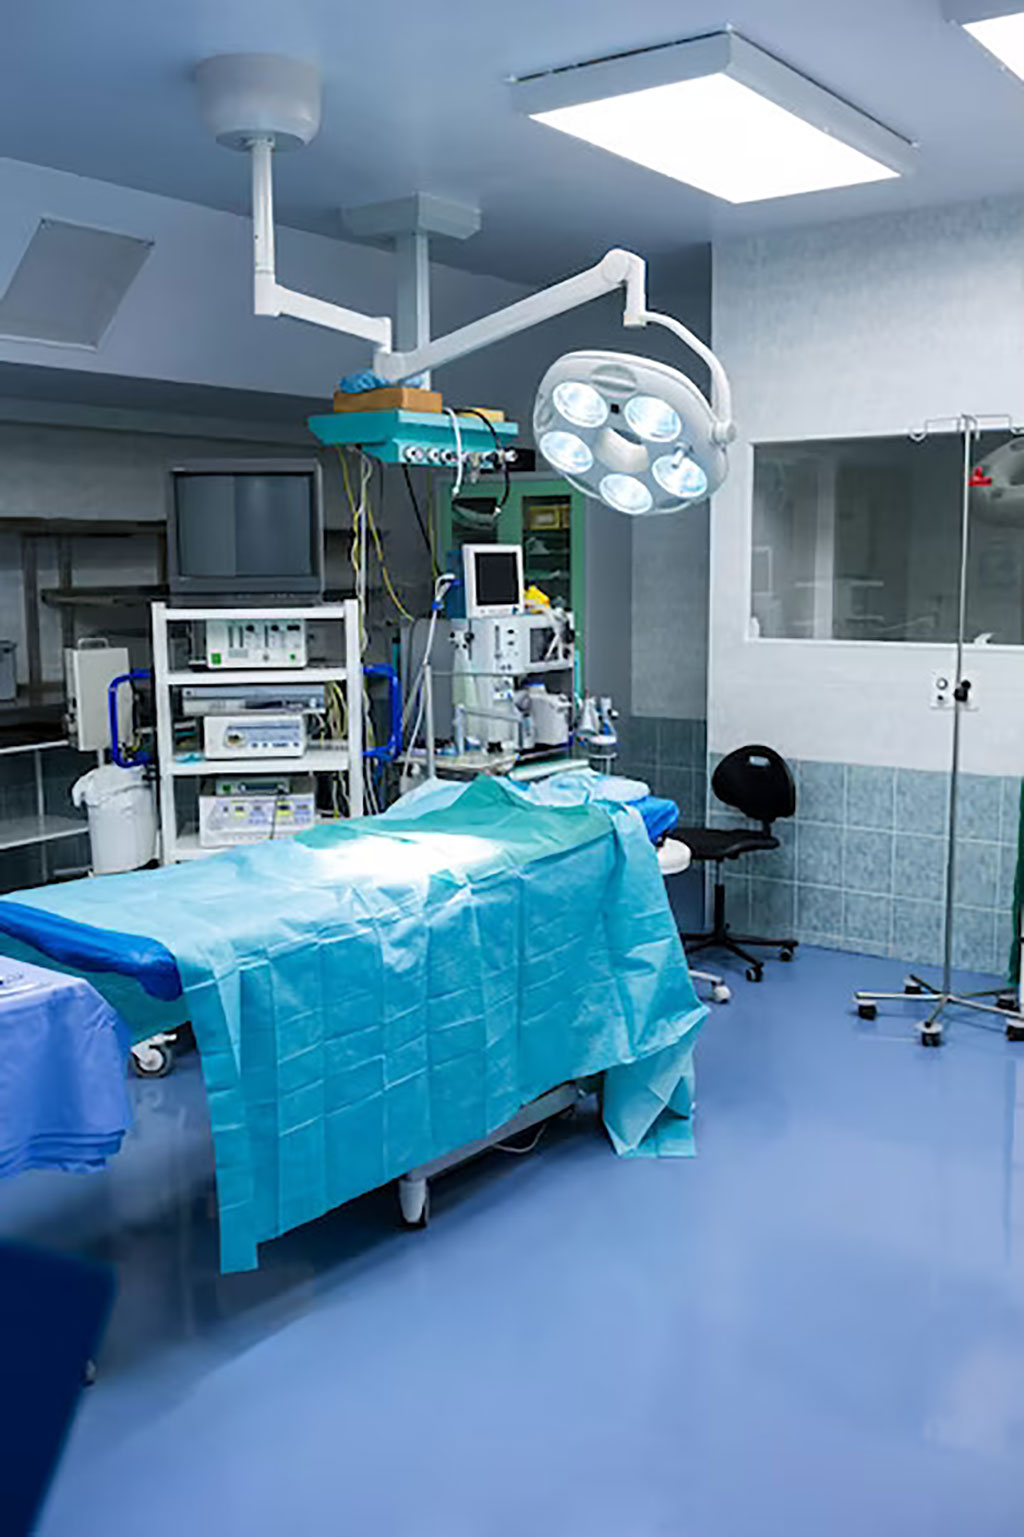 Image: The global surgical lights market is expected to grow by close to USD 0.50 billion from 2022 to 2027 (Photo courtesy of Freepik)